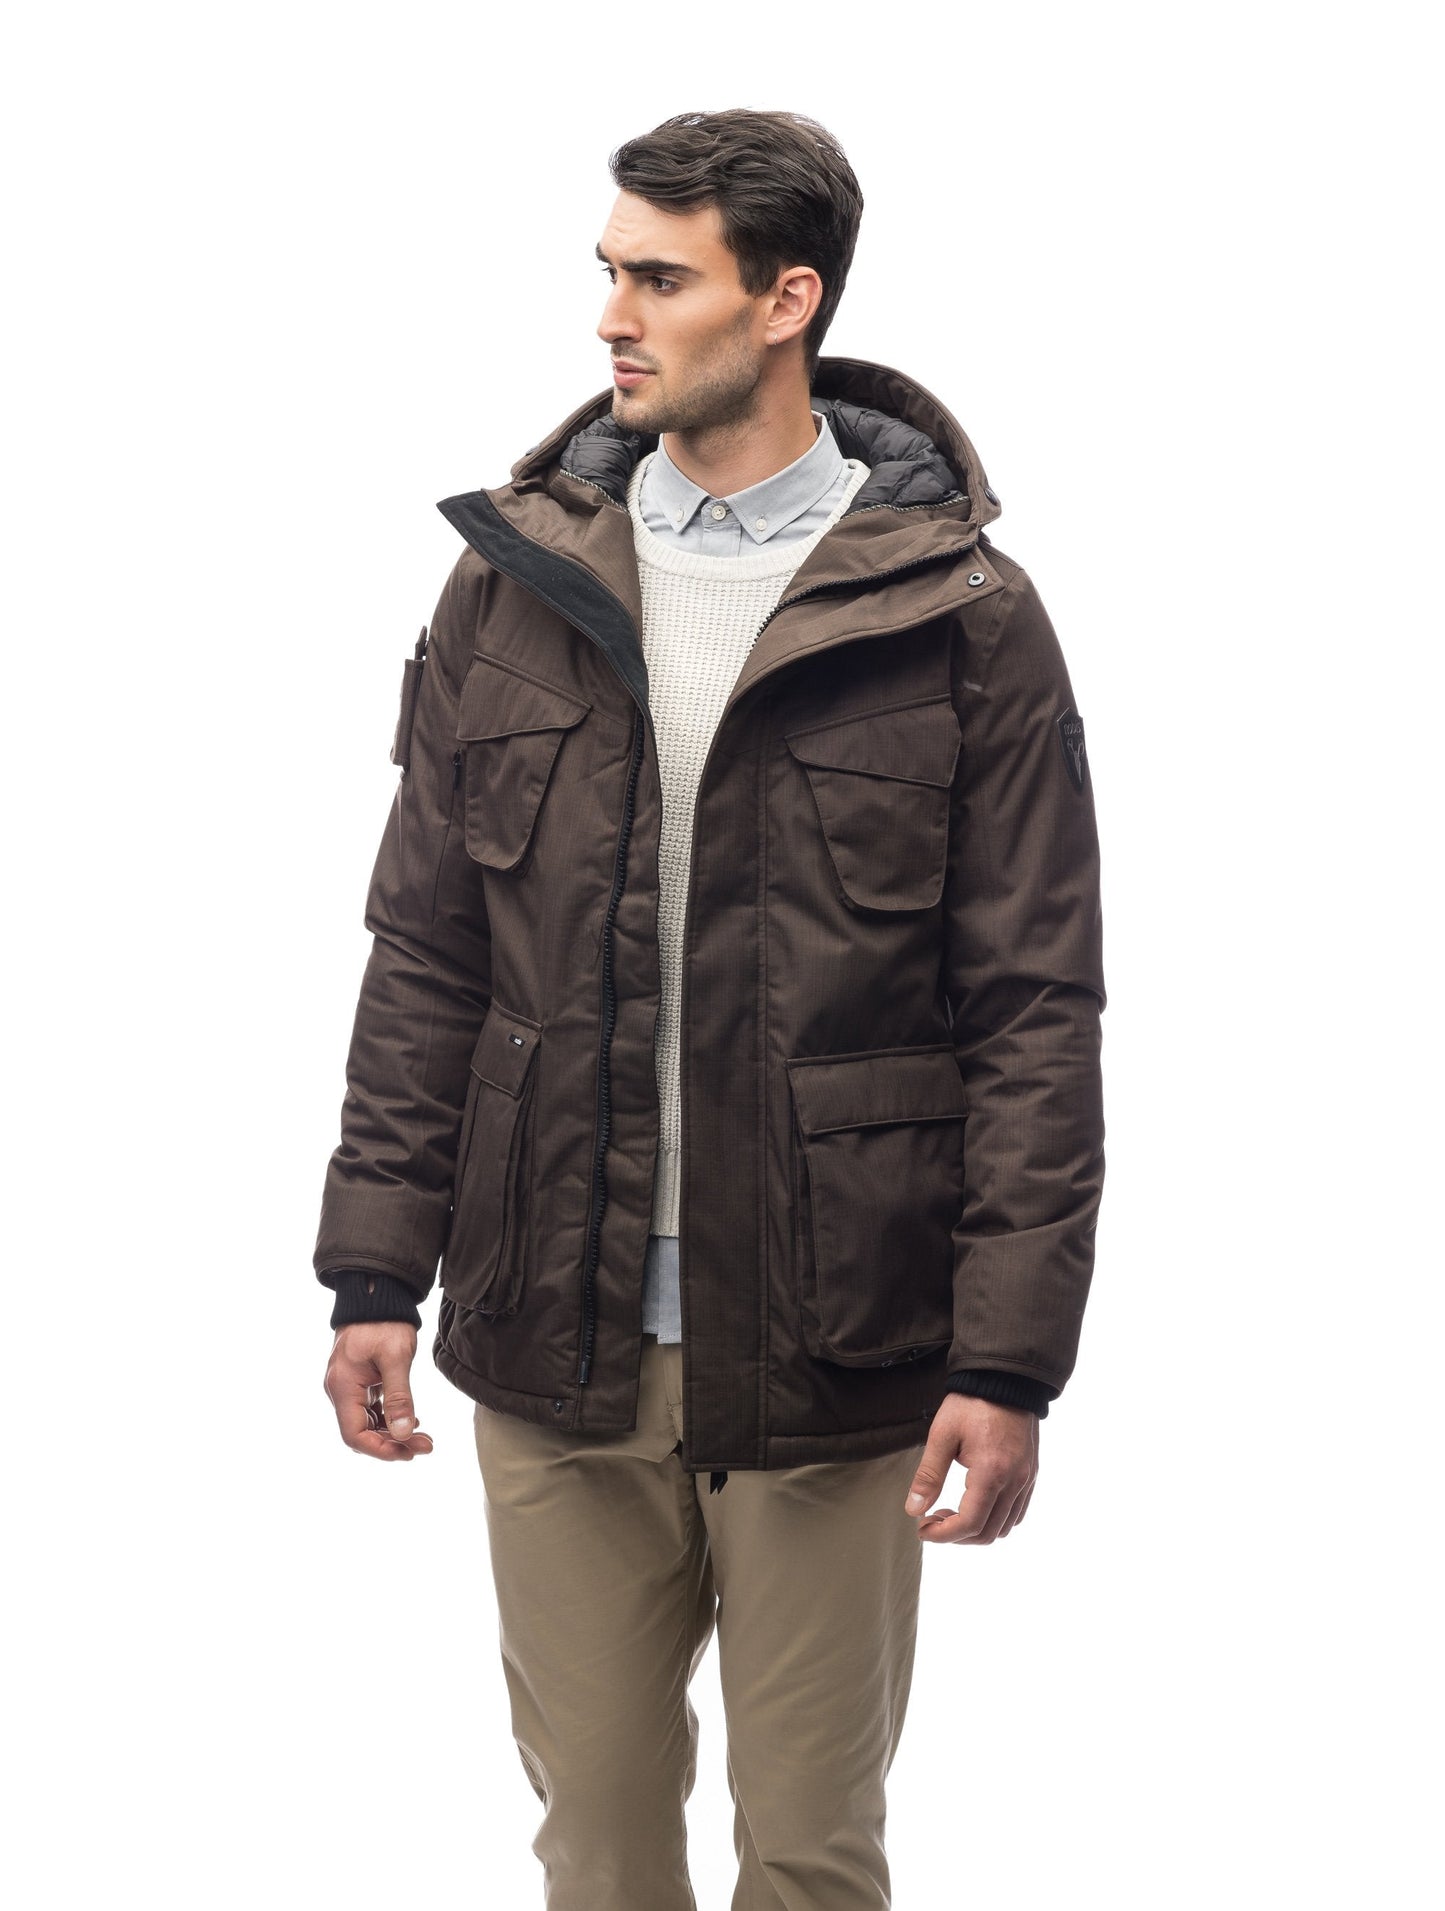 Waist length men's down filled parka with four patch pockets in CH Brown